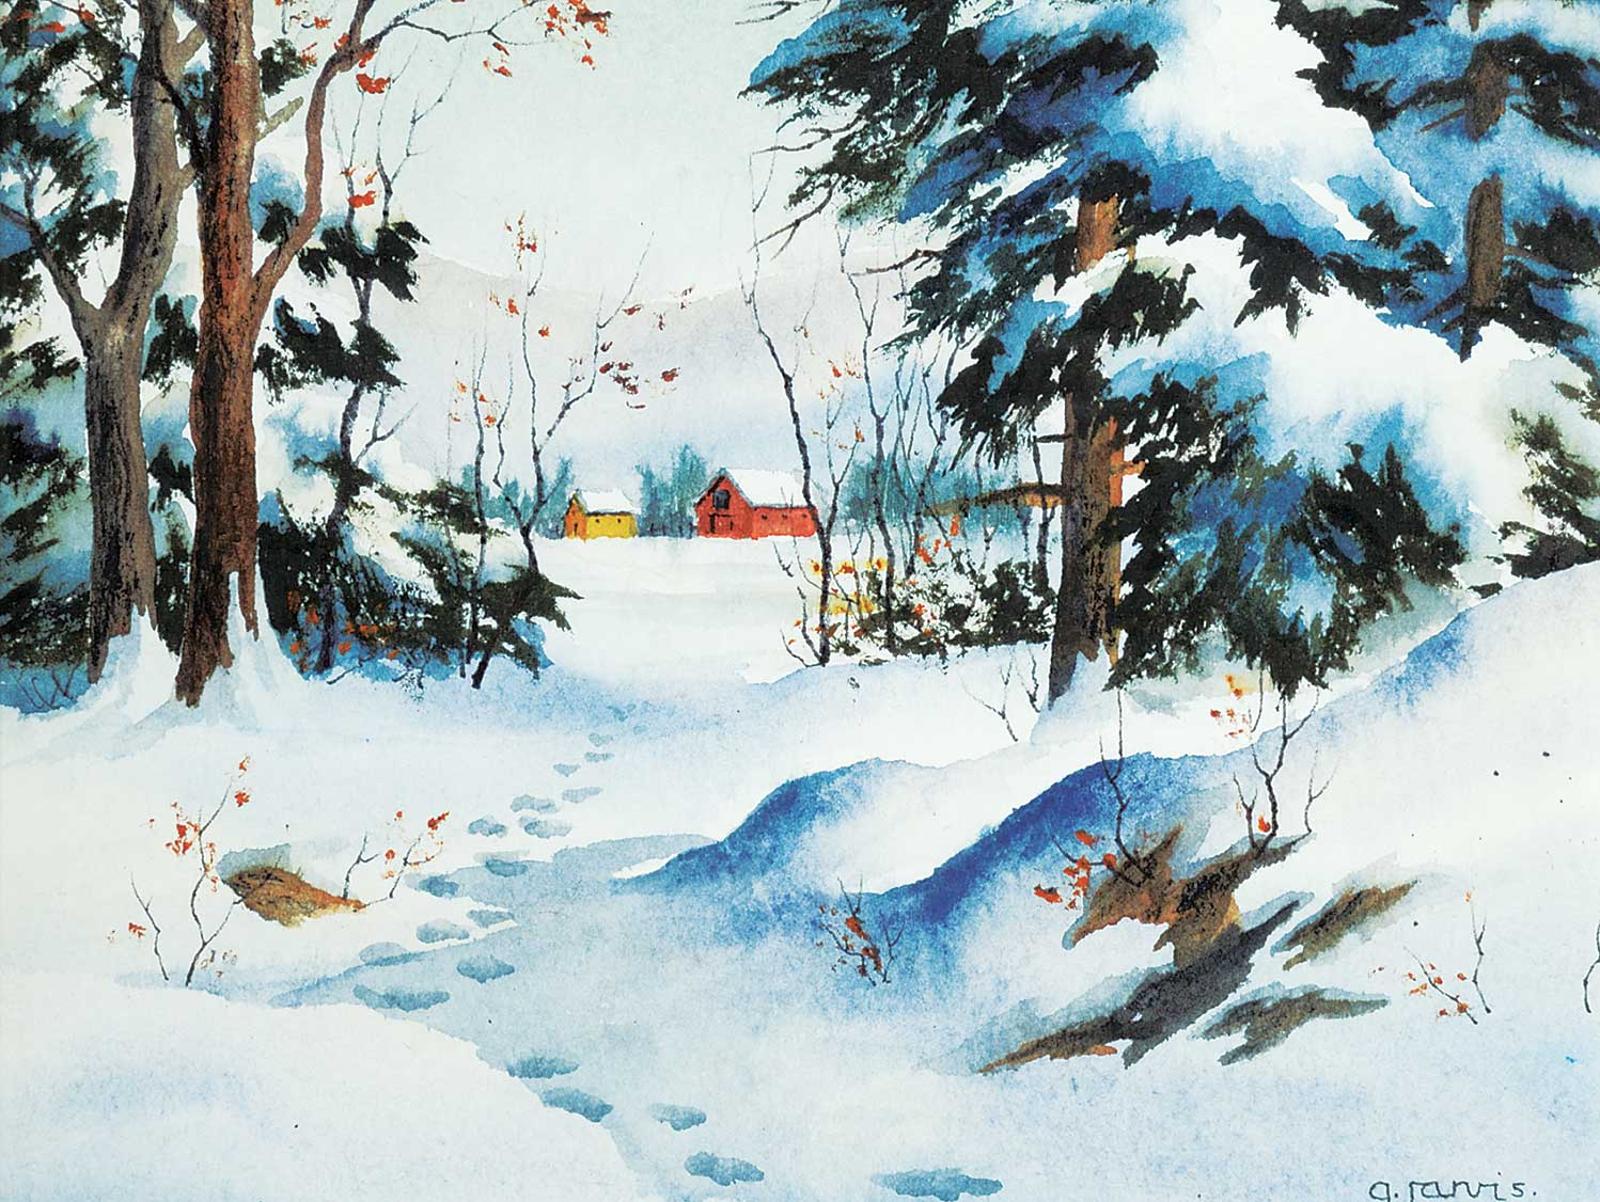 Georgia Jarvis (1944-1990) - Untitled - Tracks in the Snow